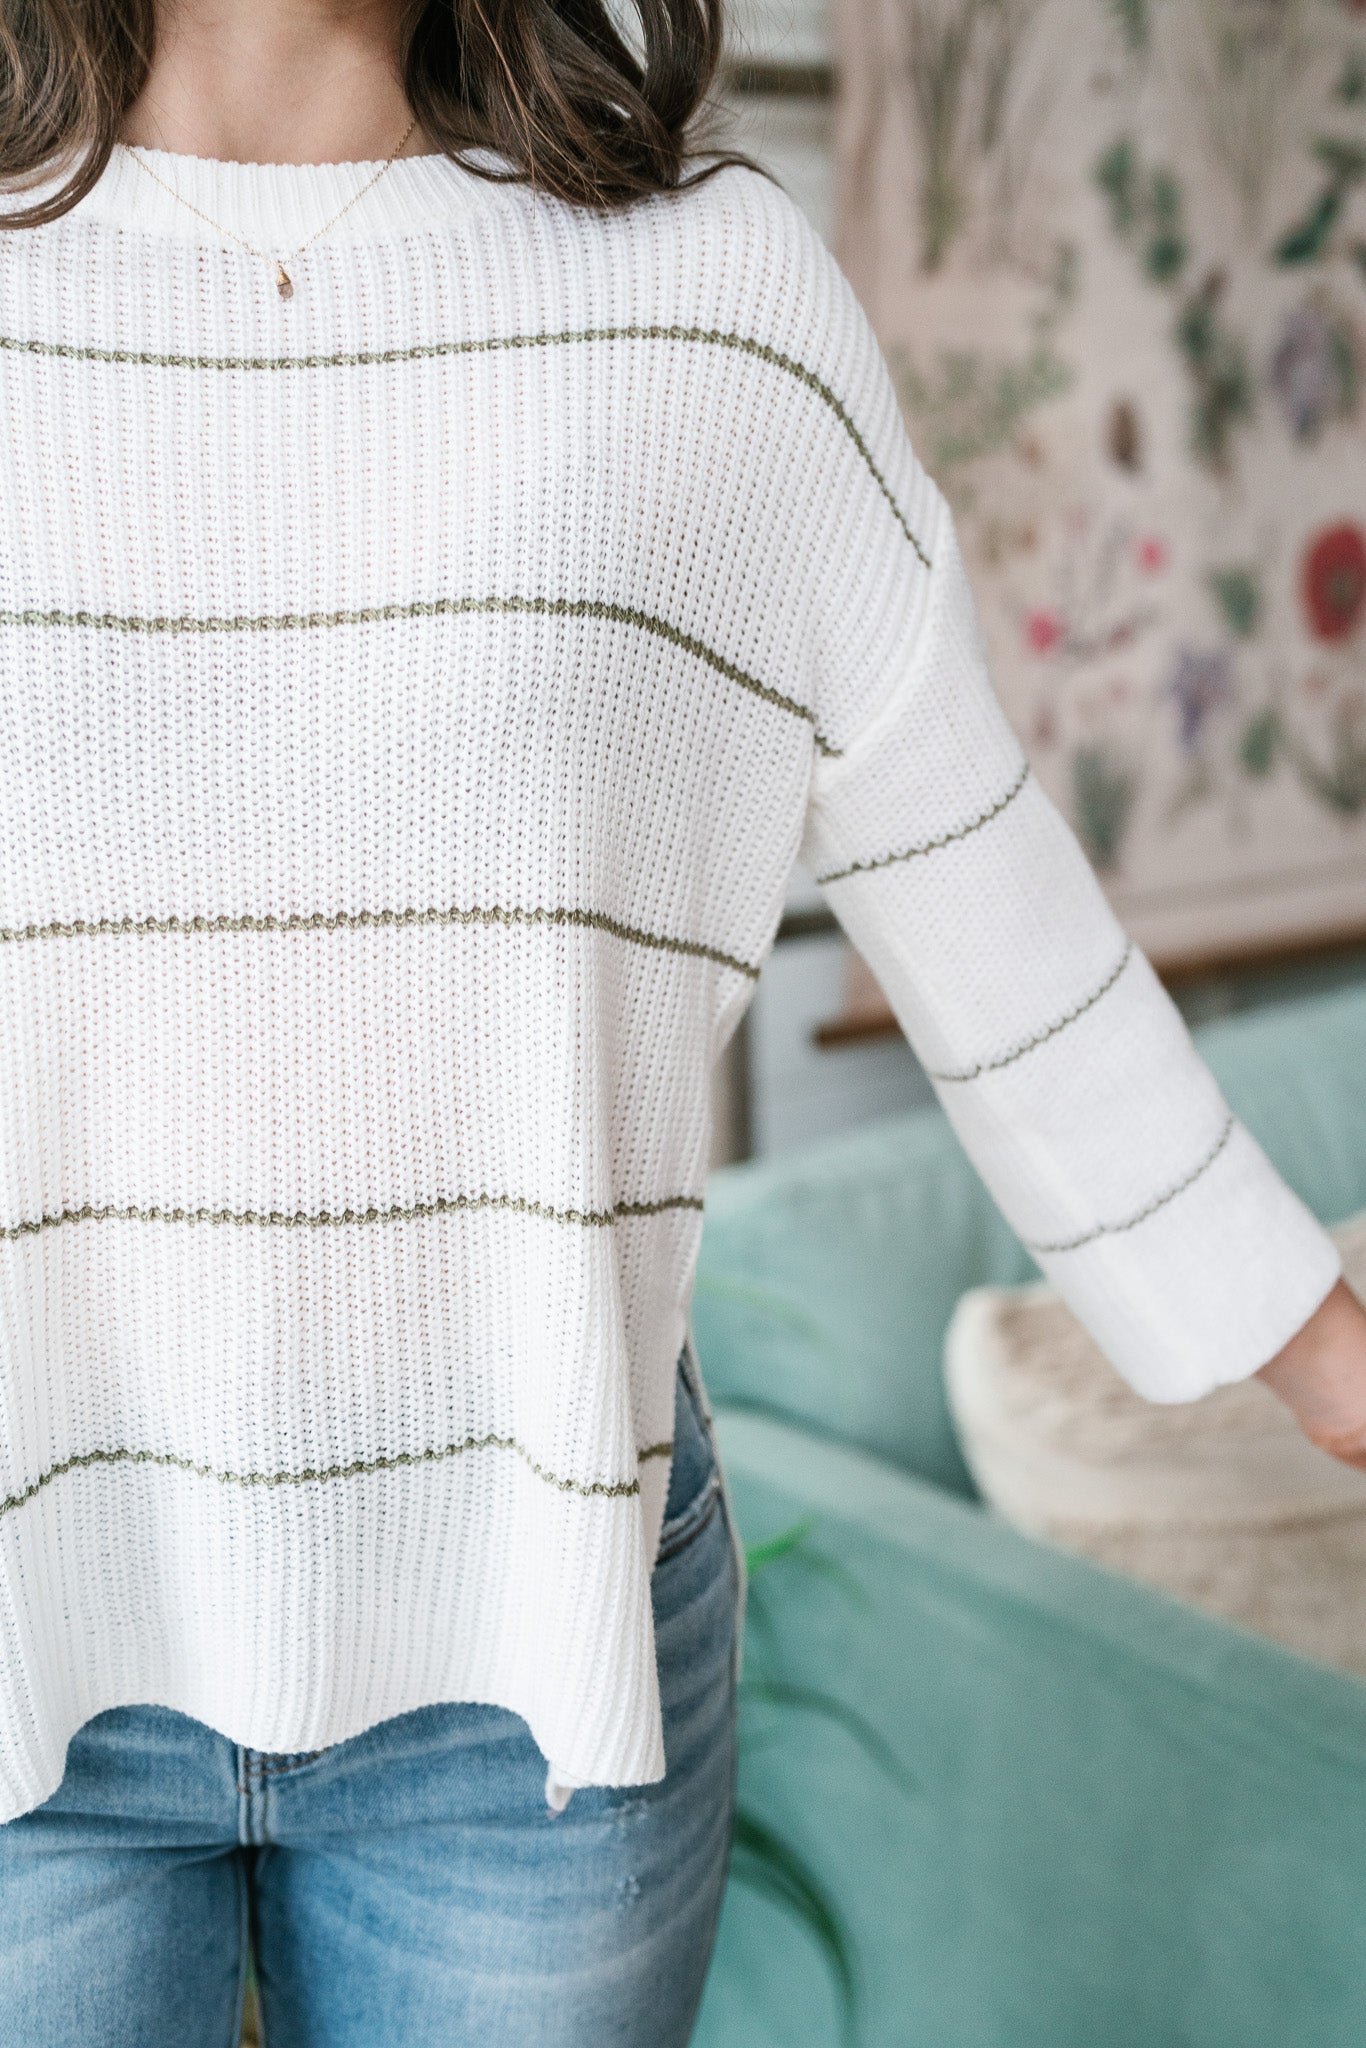 All Natural Striped Sweater